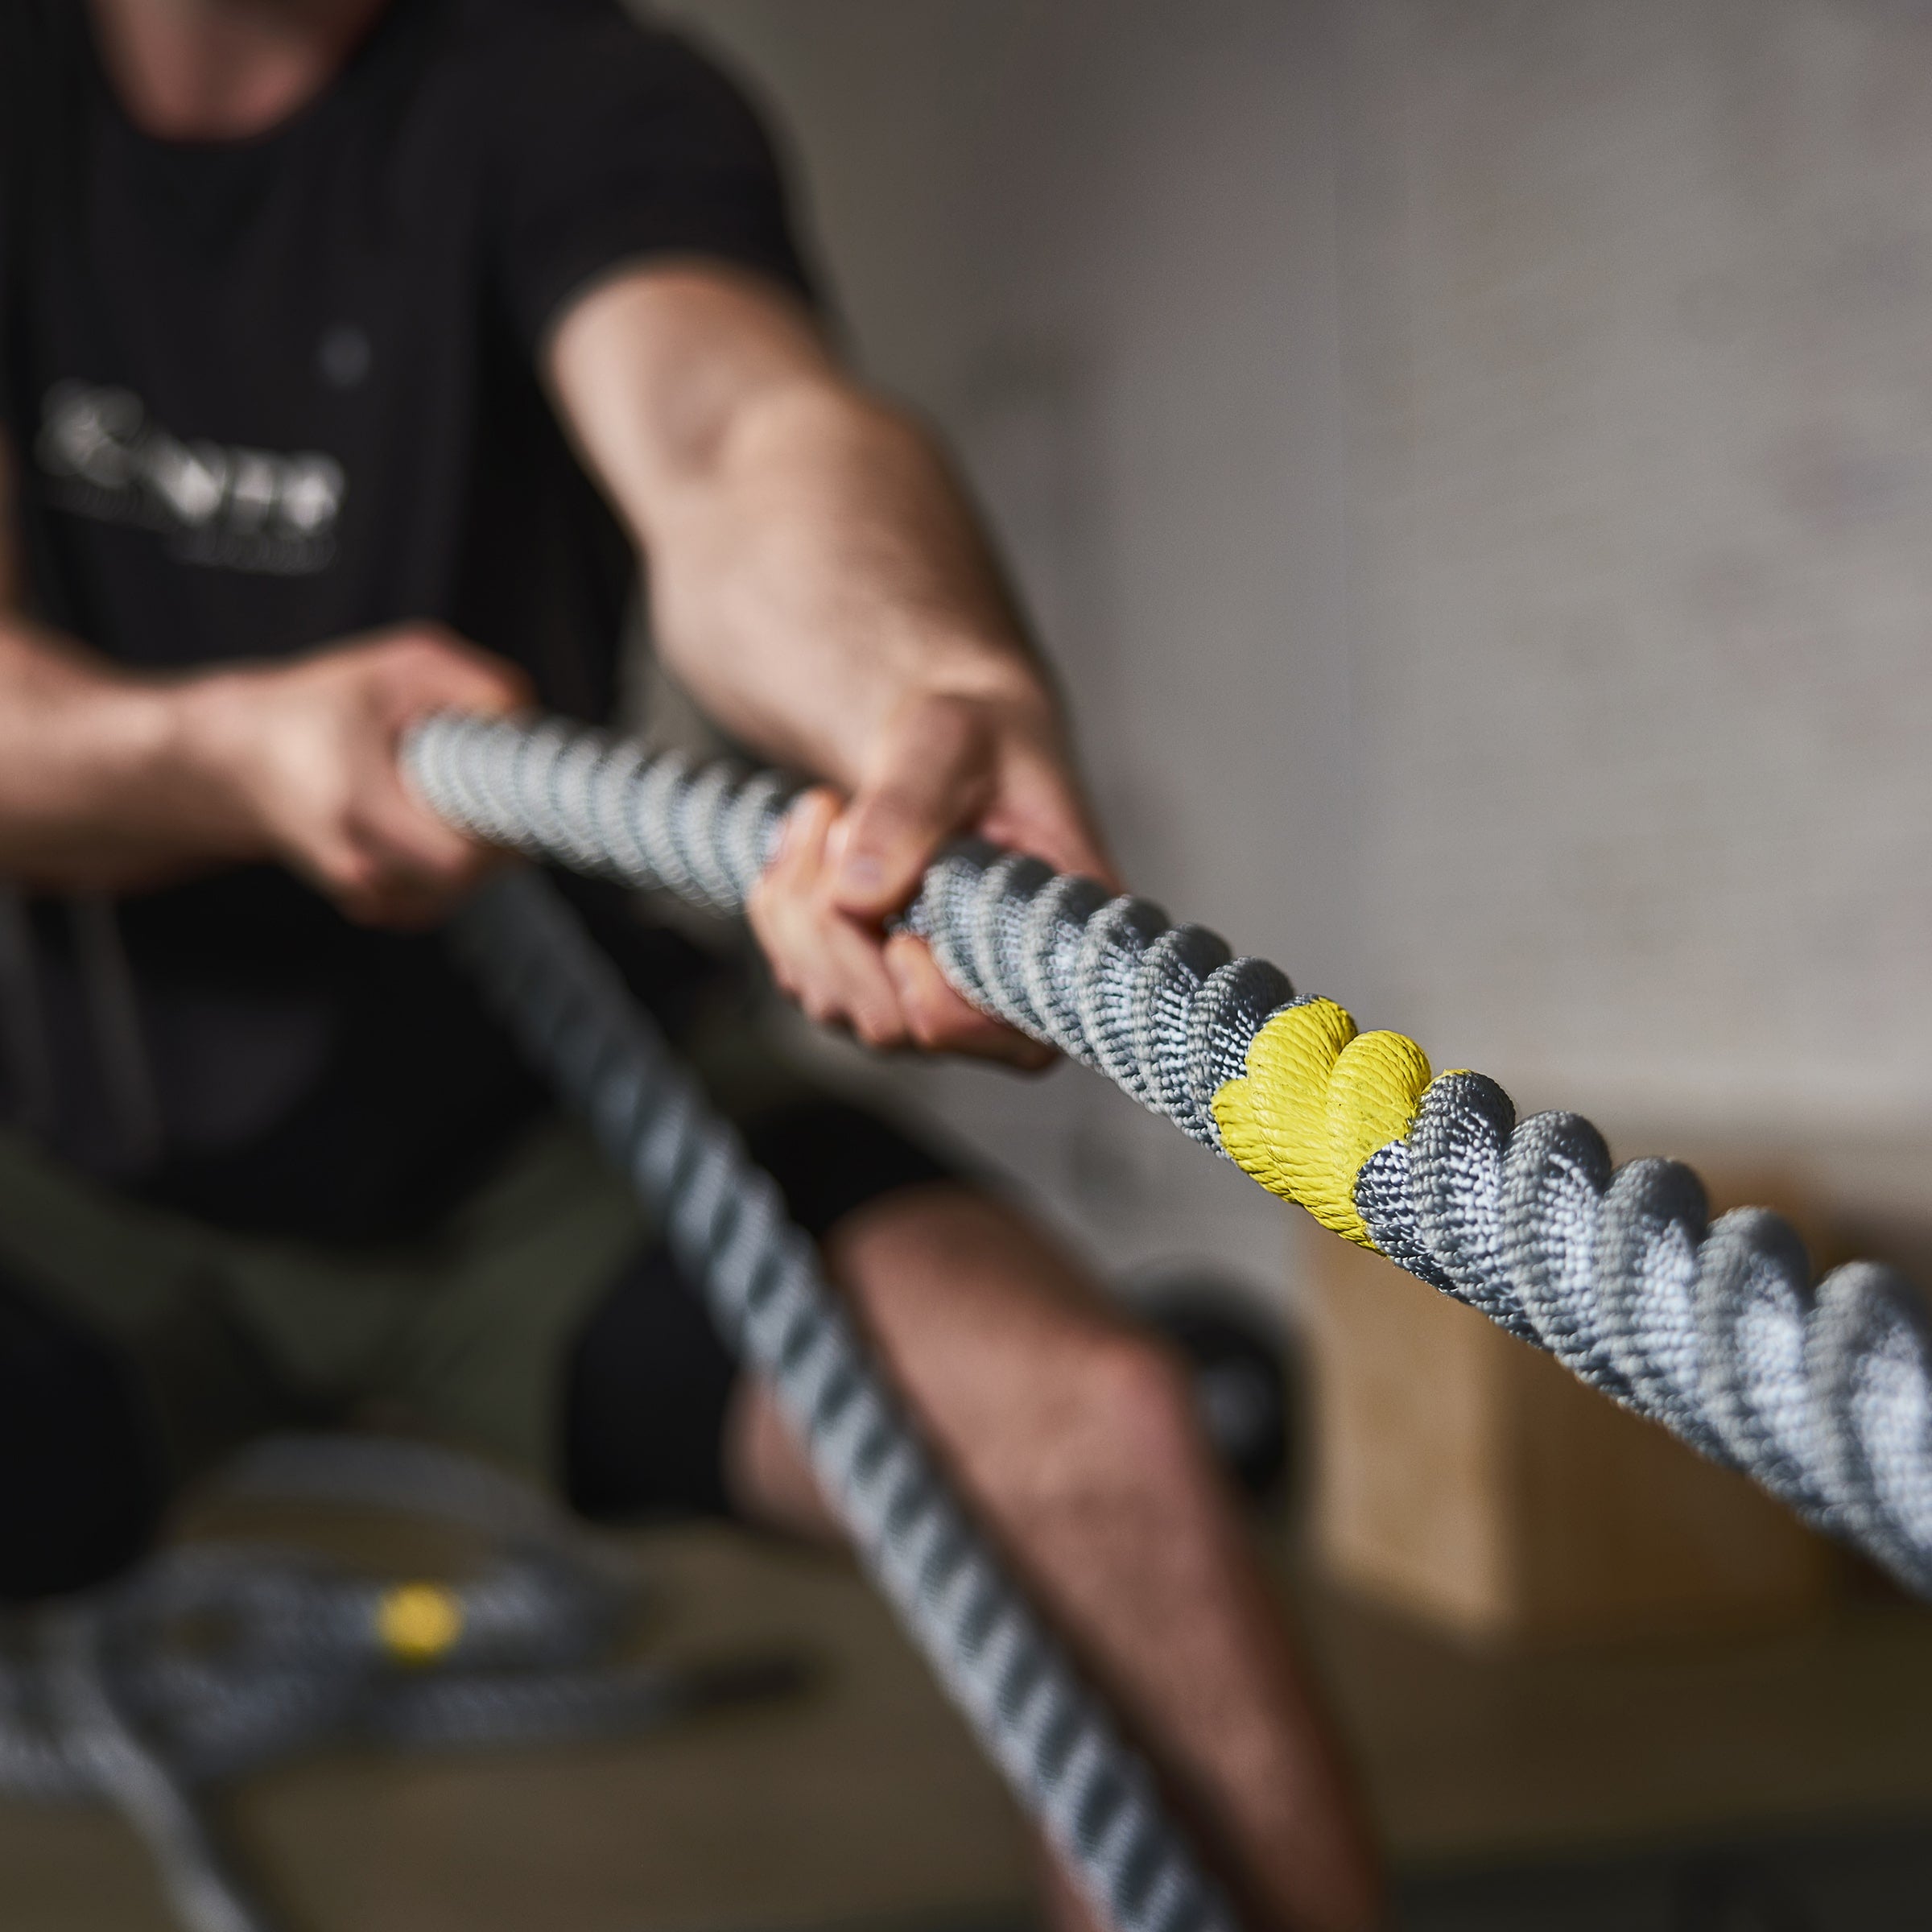 CENTR x HYROX Competition Power Rope (SHIPPING EARLY MAY)